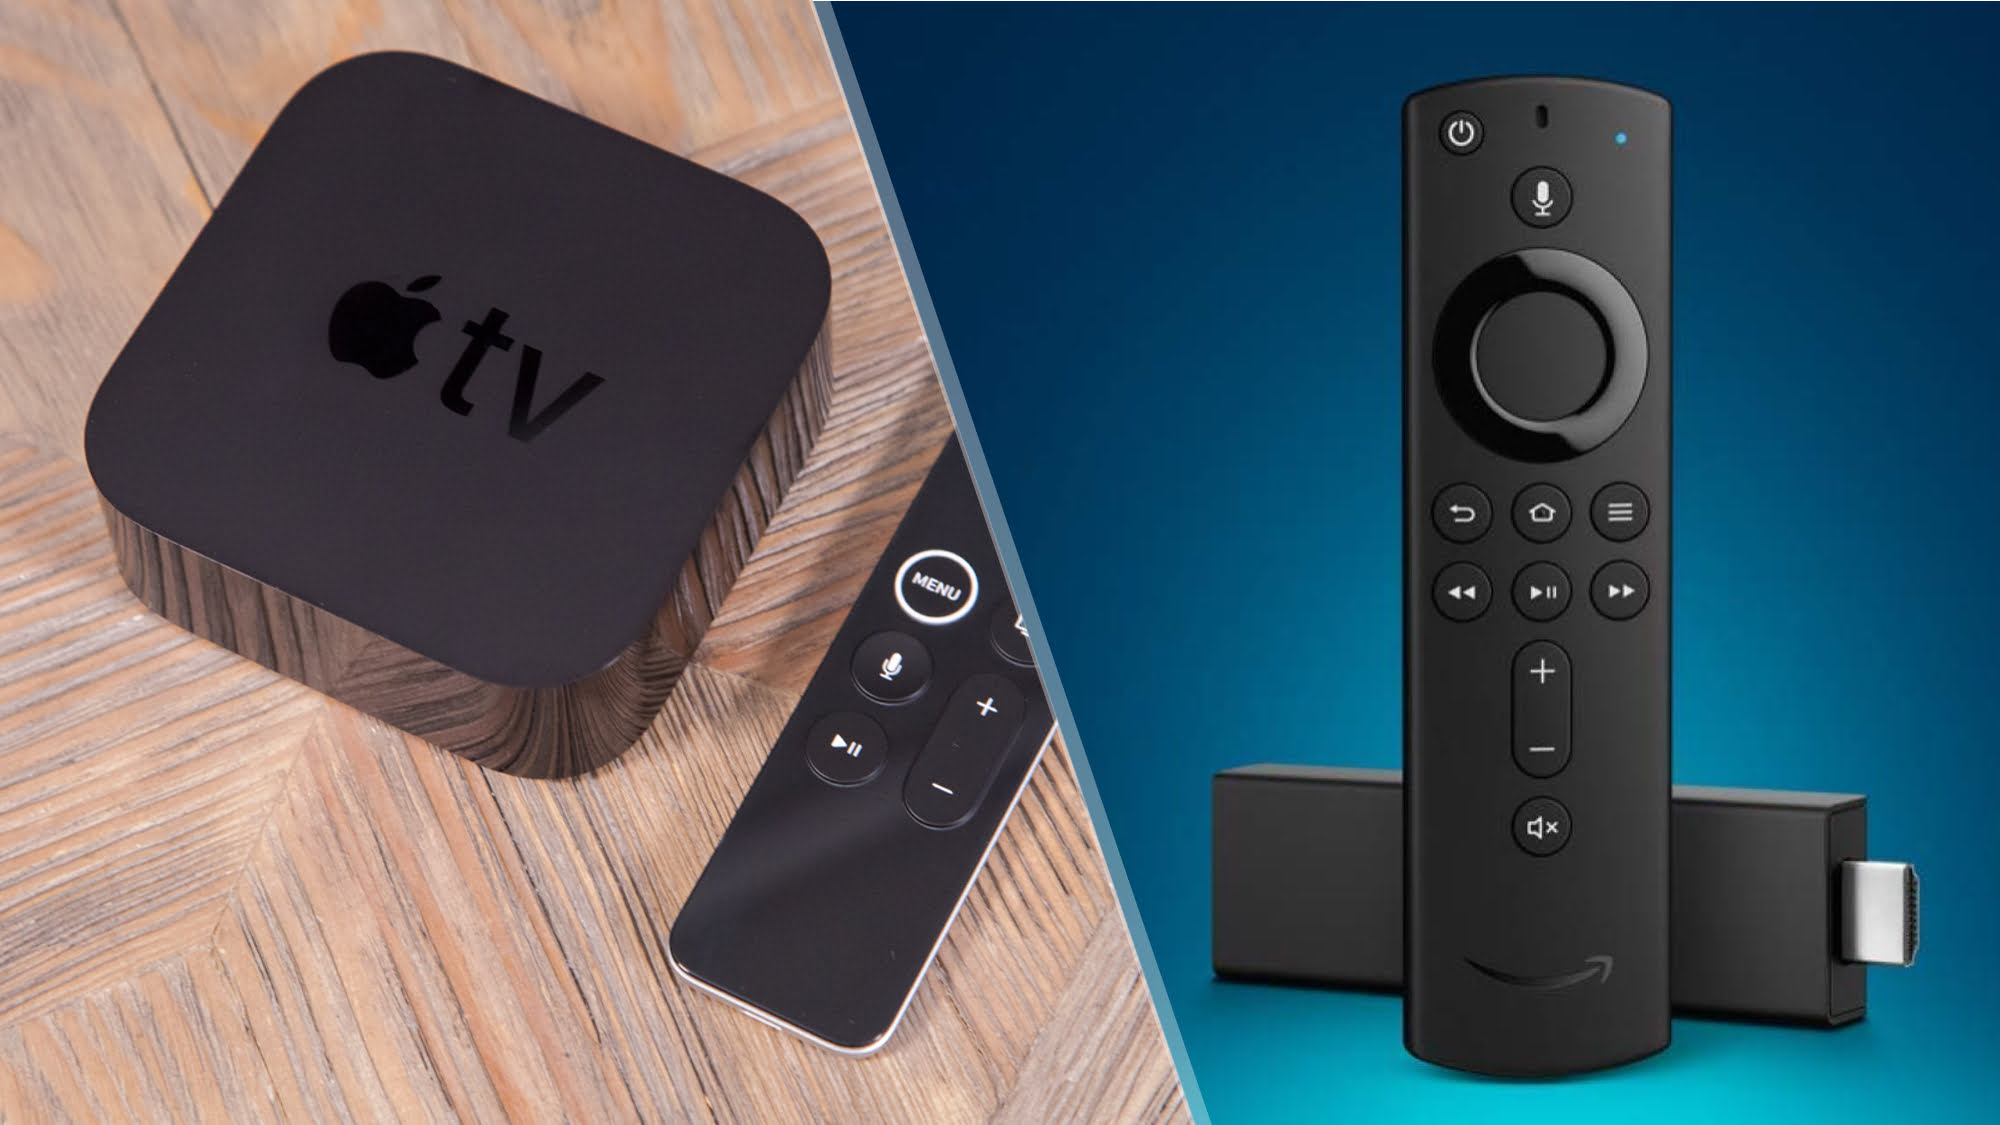 Apple TV vs Amazon Fire TV Stick: Which one should you pick?